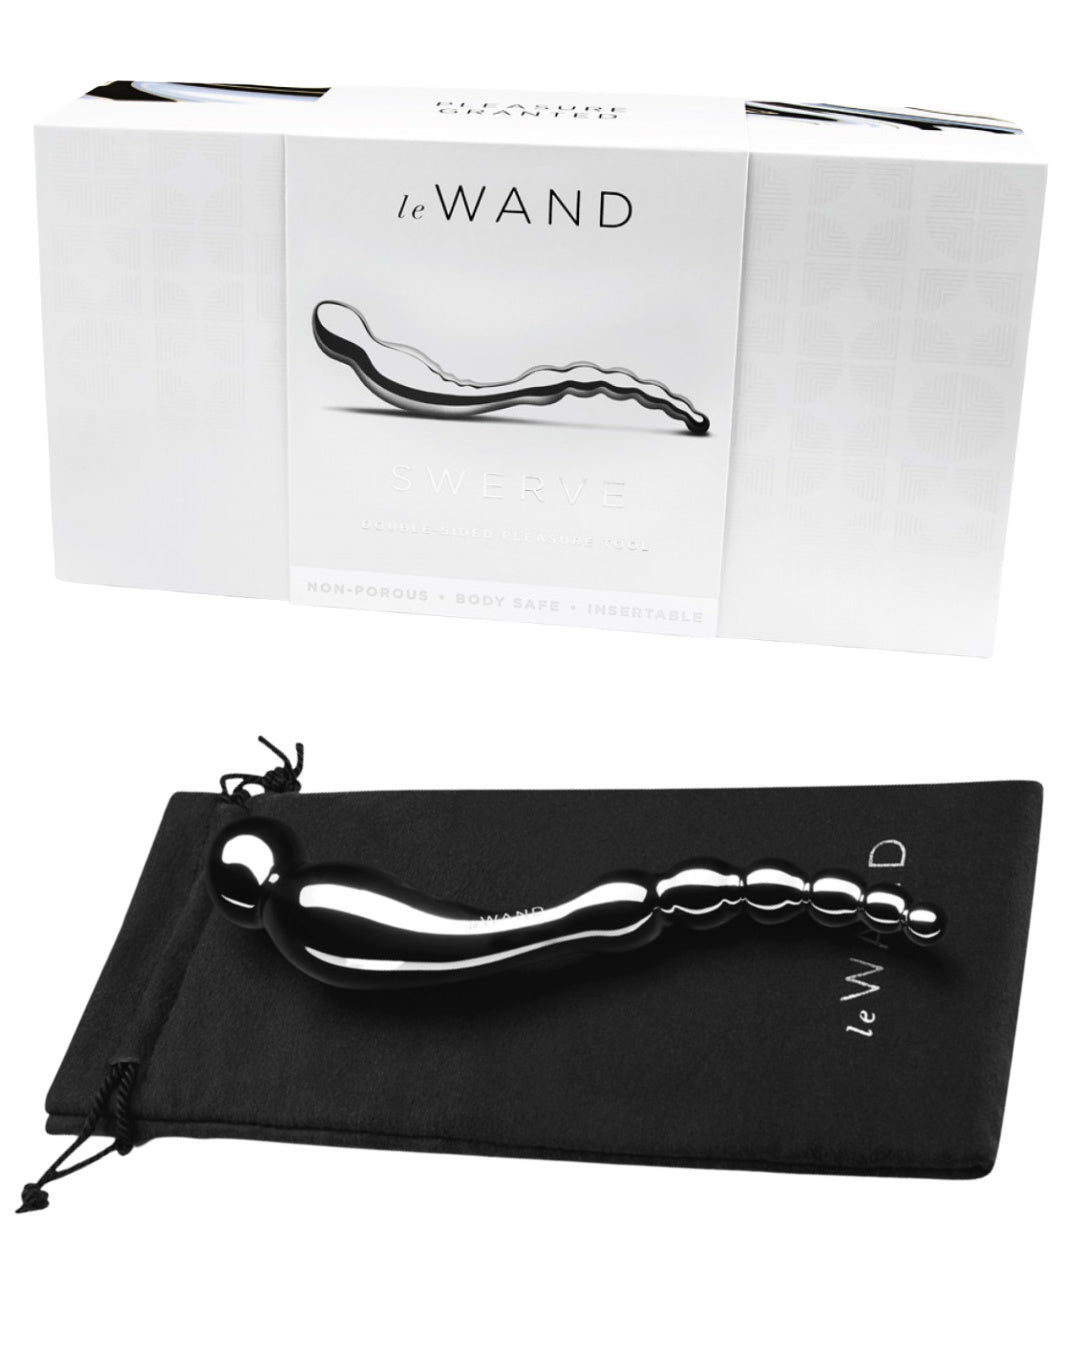 Le Wand Swerve Double Ended Stainless Steel Dildo laying on its black storage bag against a white background